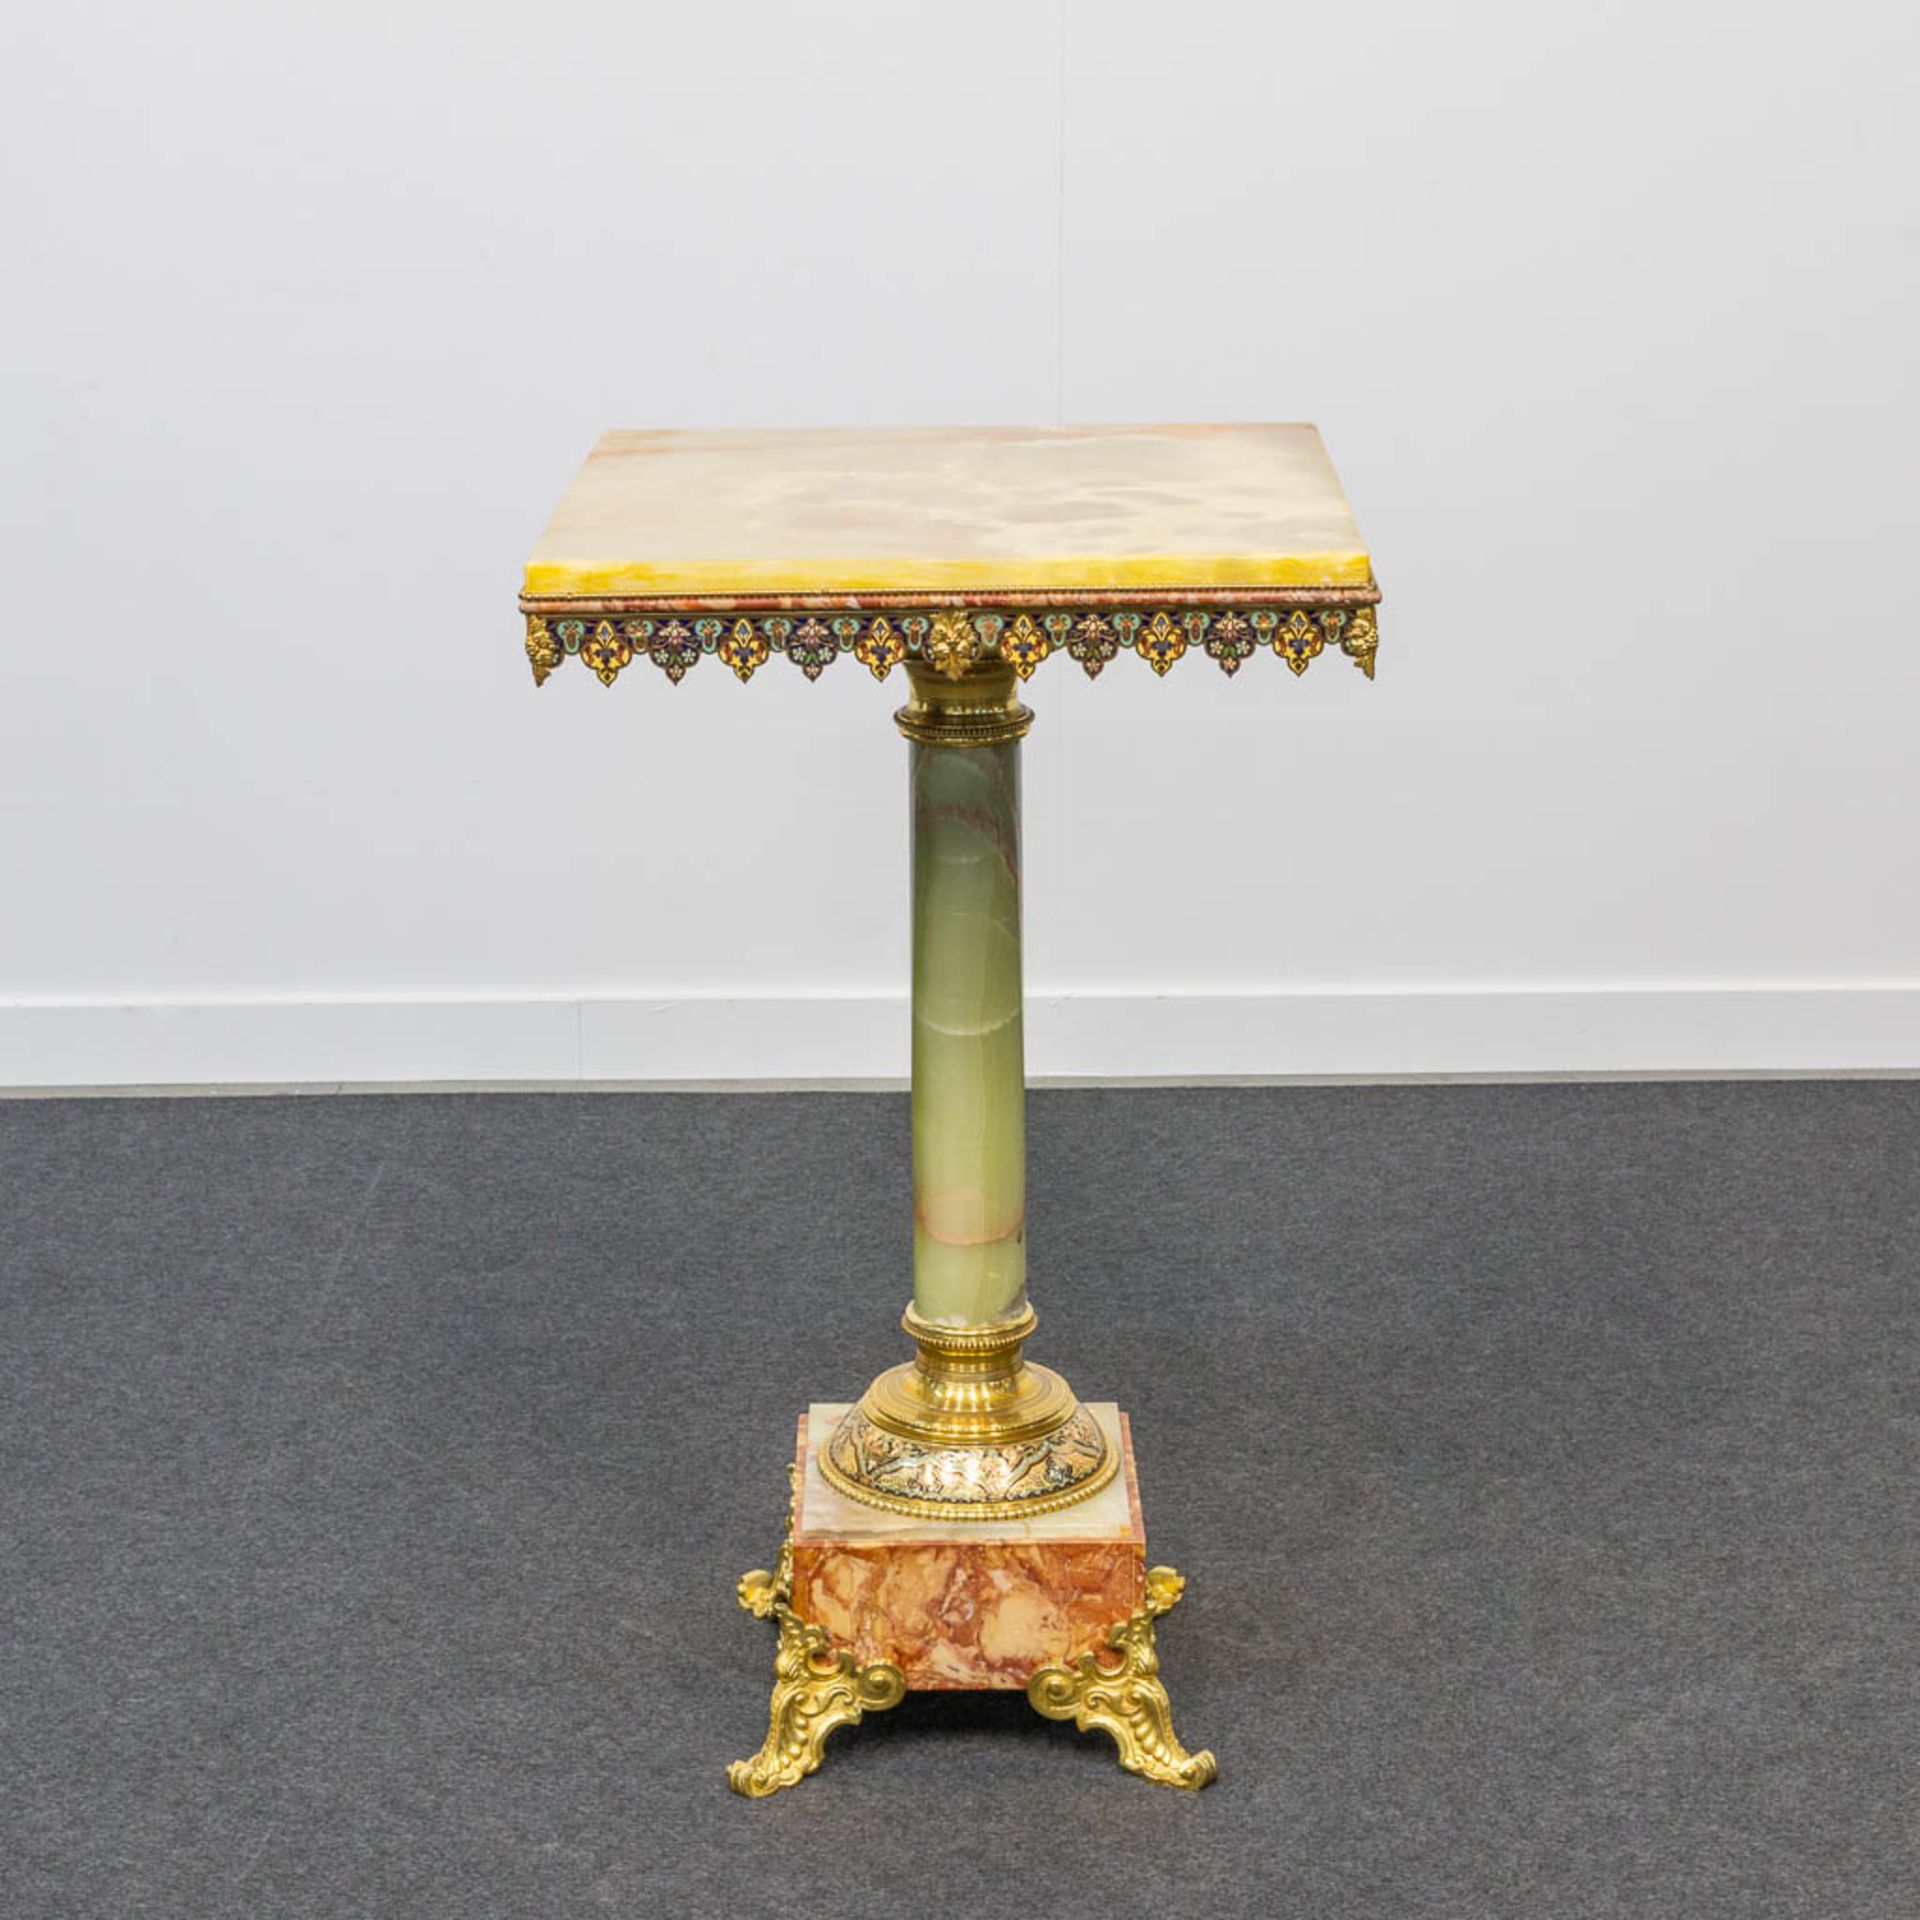 An exceptional side table made of onyx and marble, decorated with bronze and inlaid cloisonné